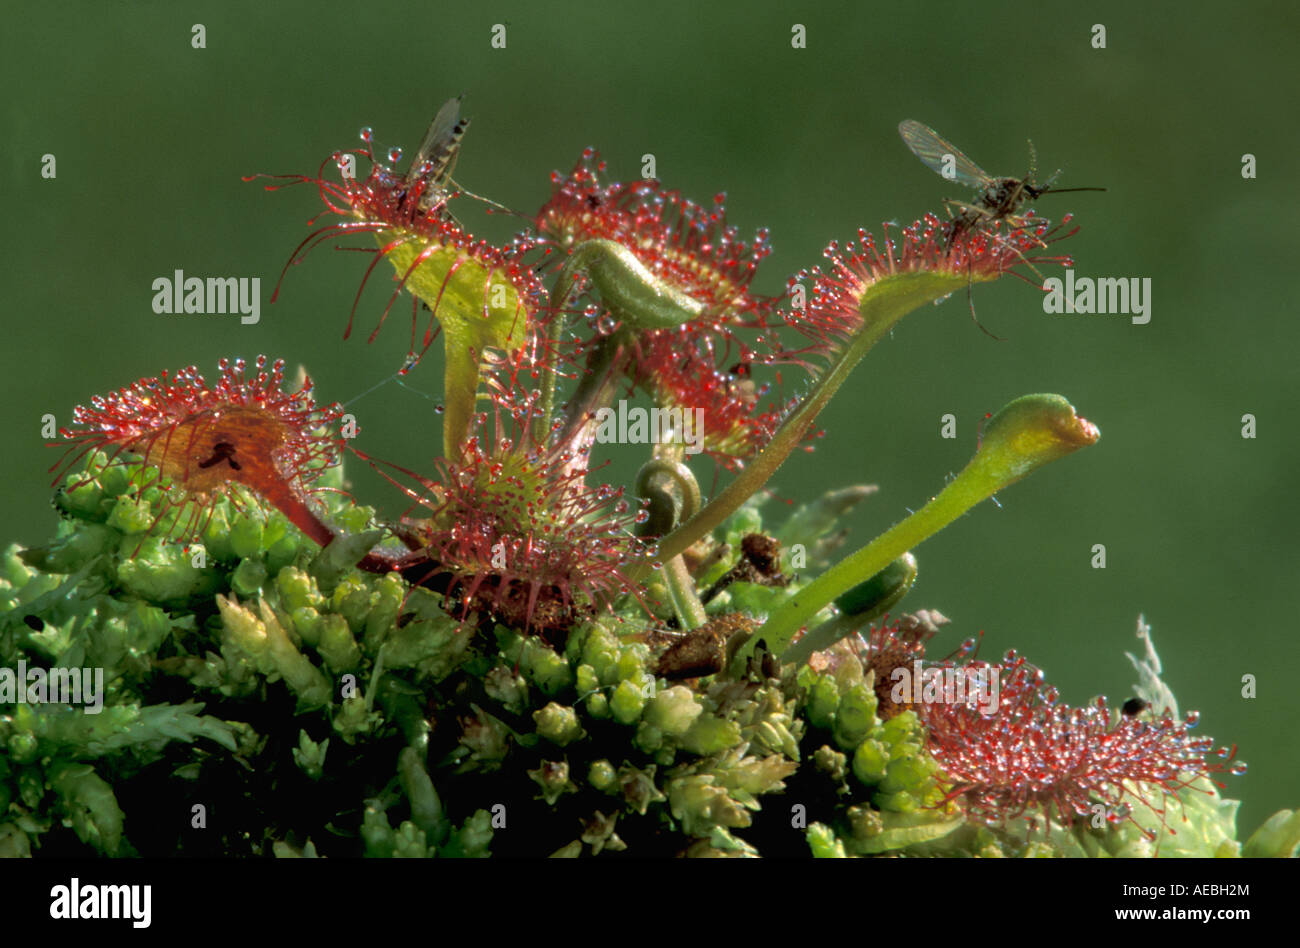 Round-leaved Sundew with insect Drosera rotundifolia with trapped insects   North America Stock Photo